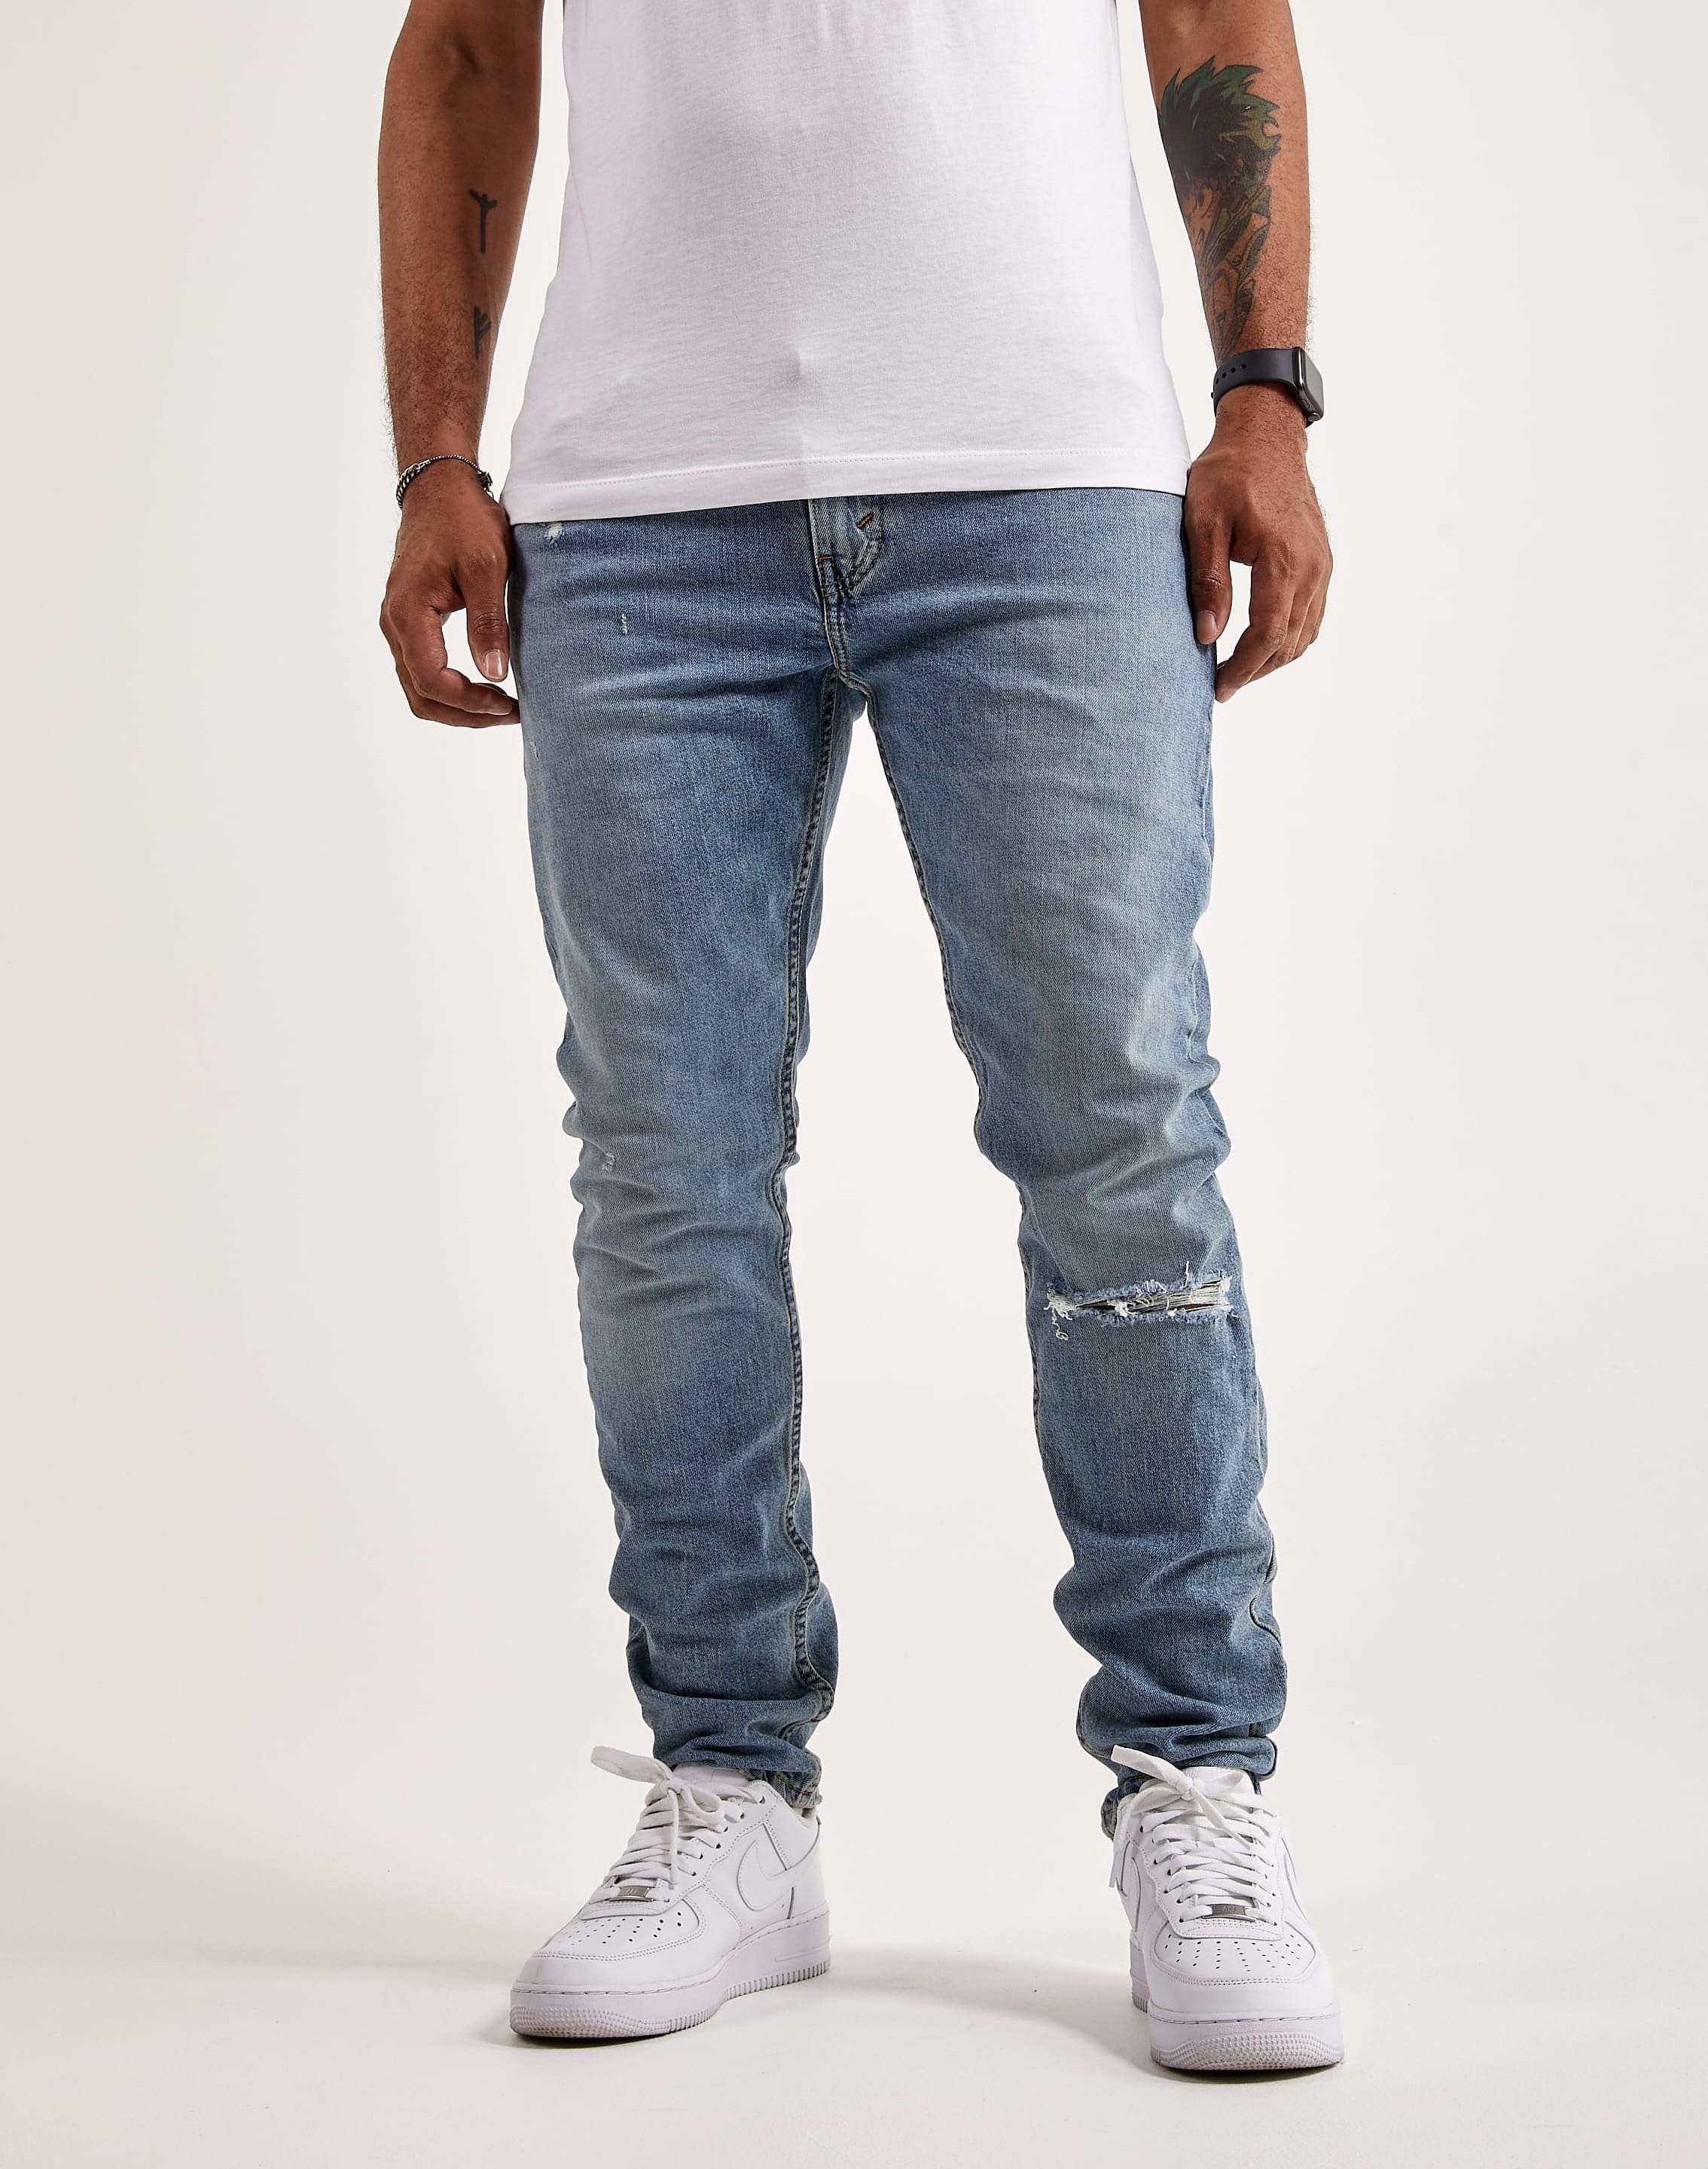 Levi's 512 slim taper fit jeans in here we go light wash